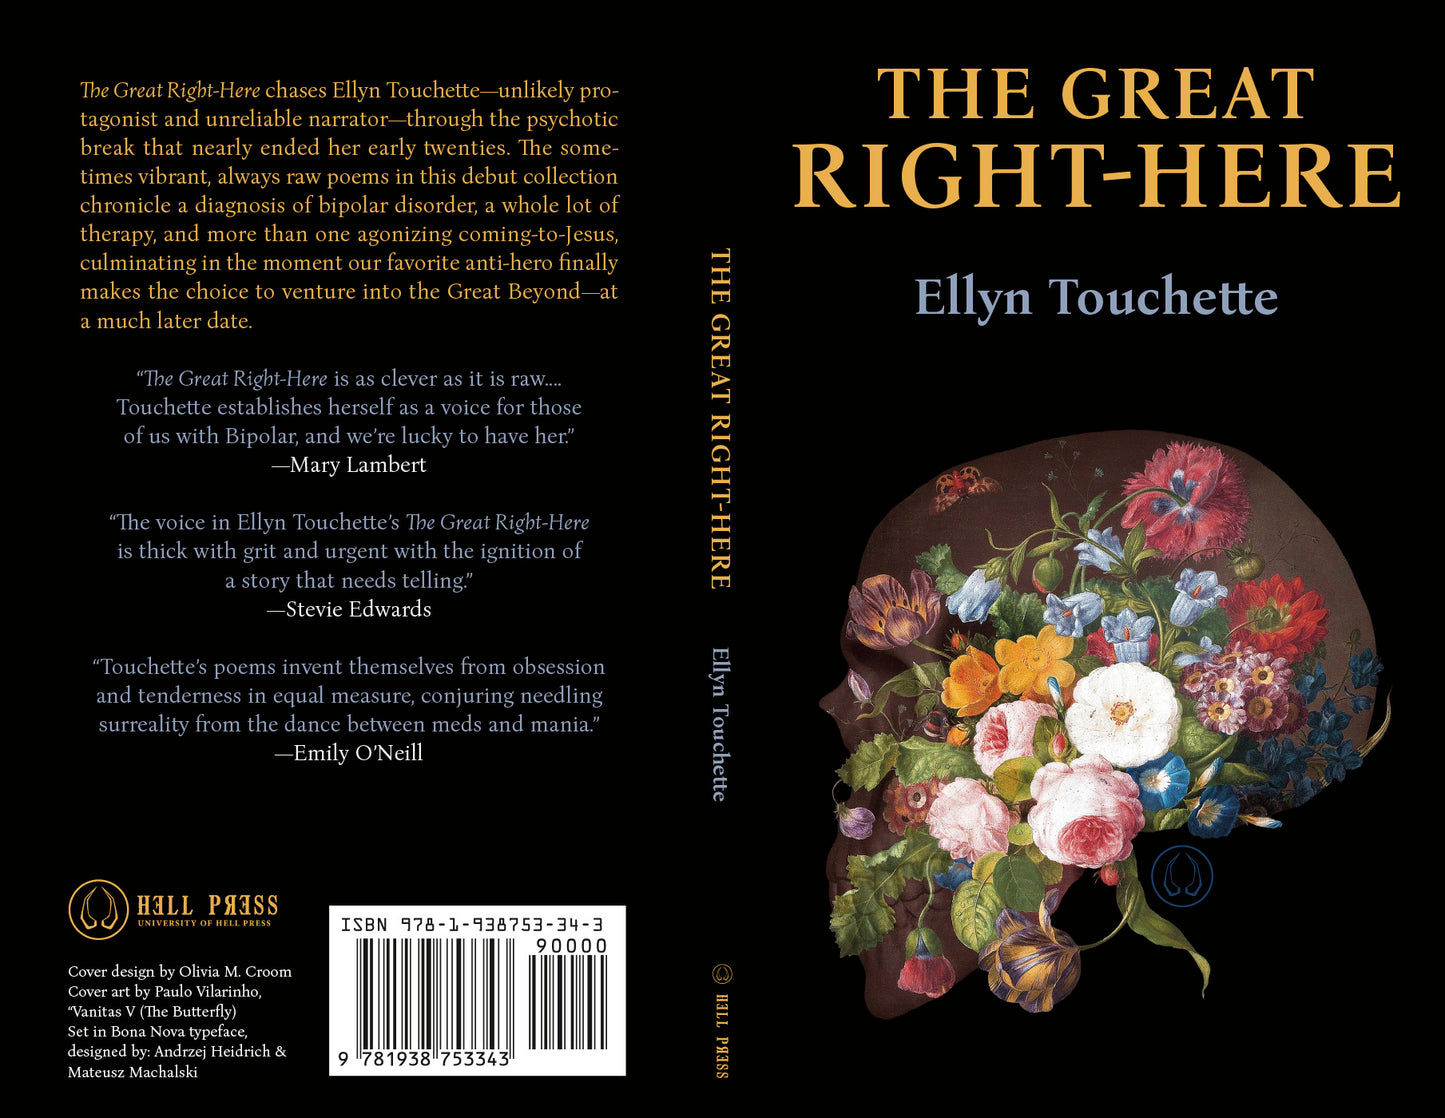 The Great Right-Here by Ellyn Touchette